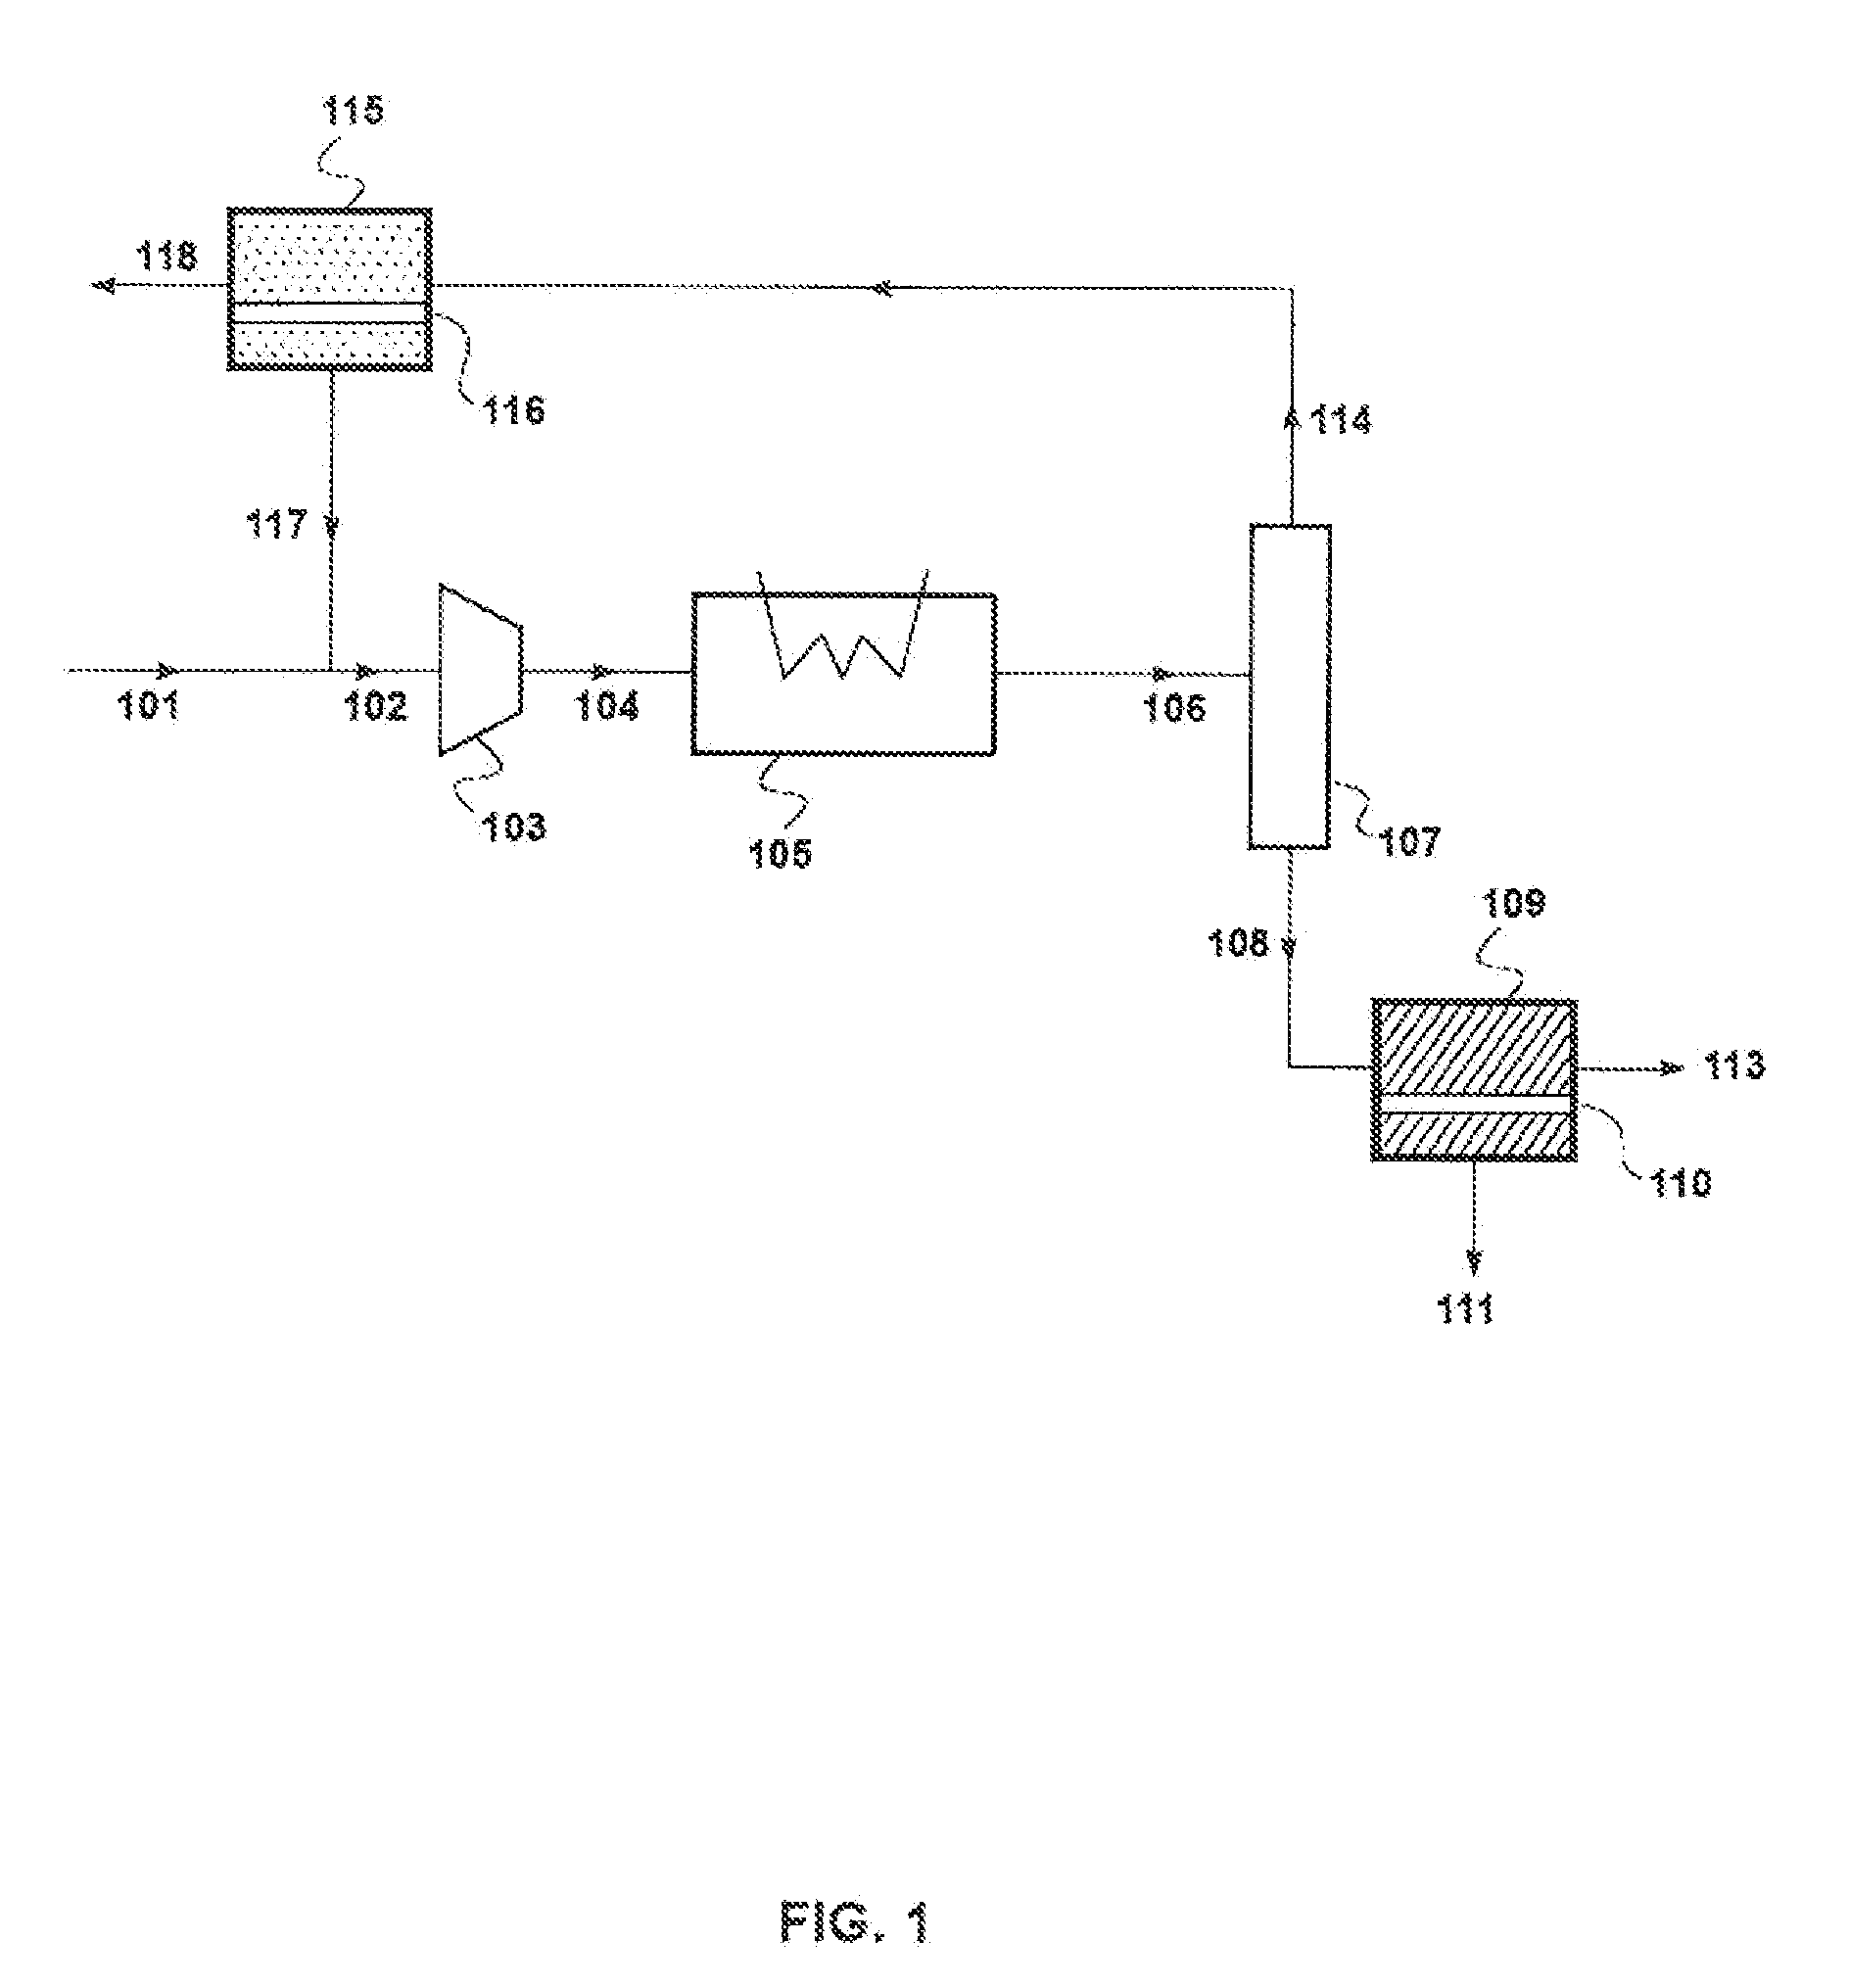 Process for Recovering Olefins from Manufacturing Operations